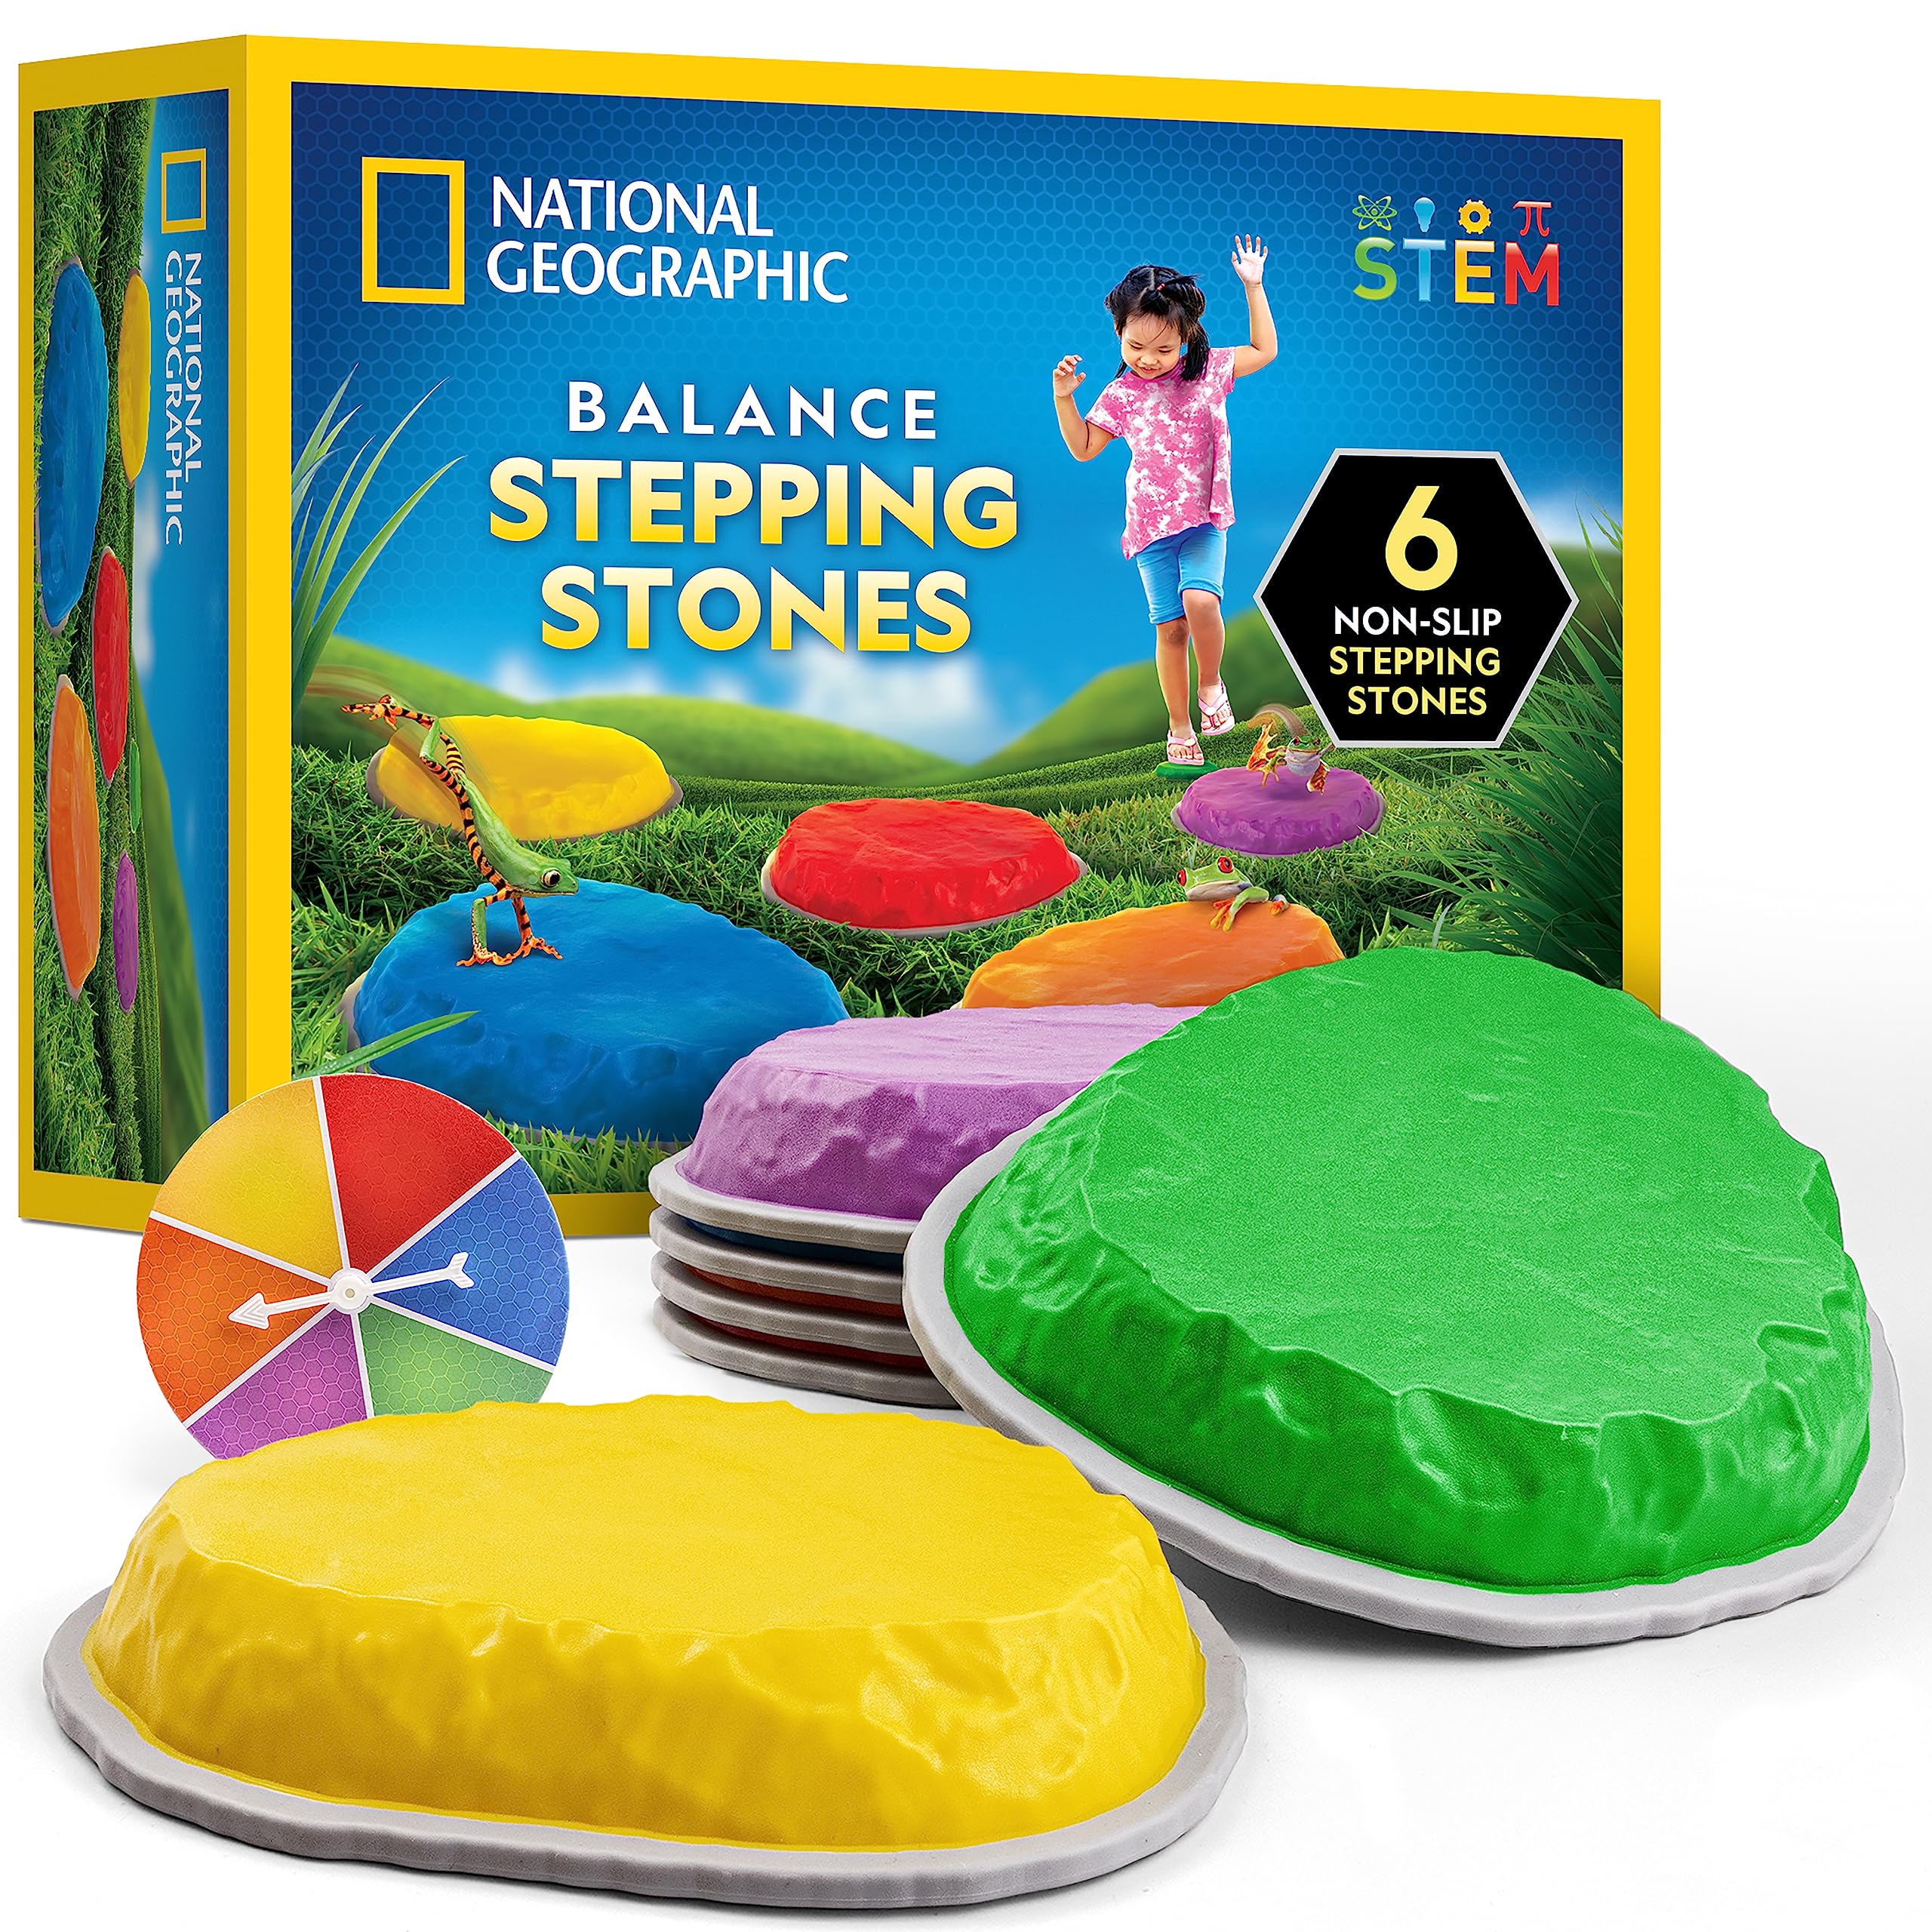 NATIONAL GEOGRAPHIC Stepping Stones for Kids – 6 Durable Non-Slip Stones Encourage Toddler Balance & Gross Motor Skills, Indoor & Outdoor Toys, Balance Stones, Obstacle Course (Amazon Exclusive)